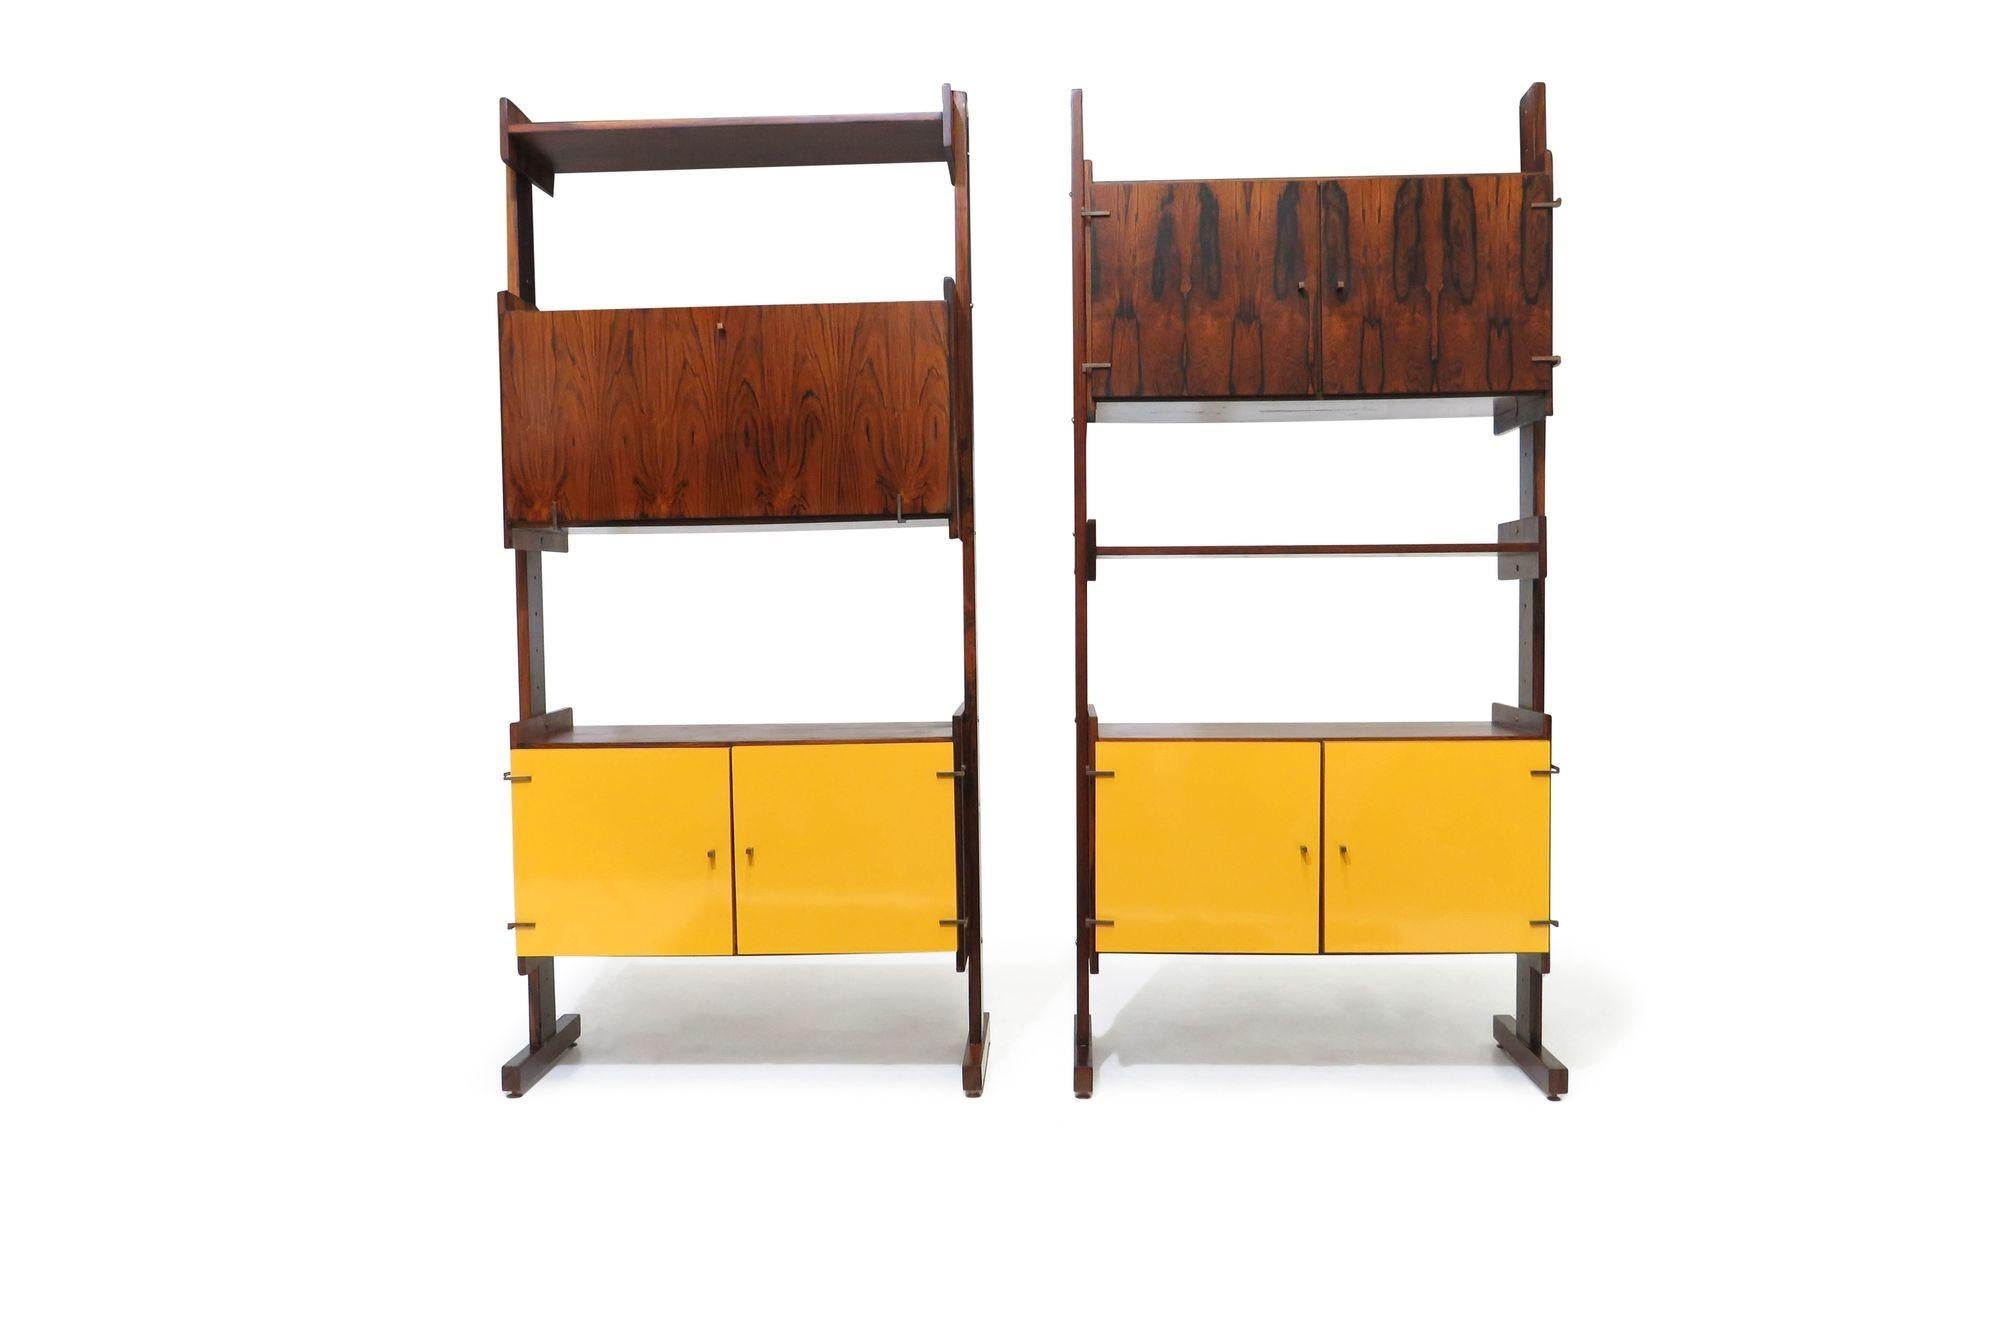 Brazilian rosewood room divider bookcase with adjustable cabinets and shelves with yellow formica front and drop front cabinet. 
Measurements
W 34'' x D 14.75'' x 72''.